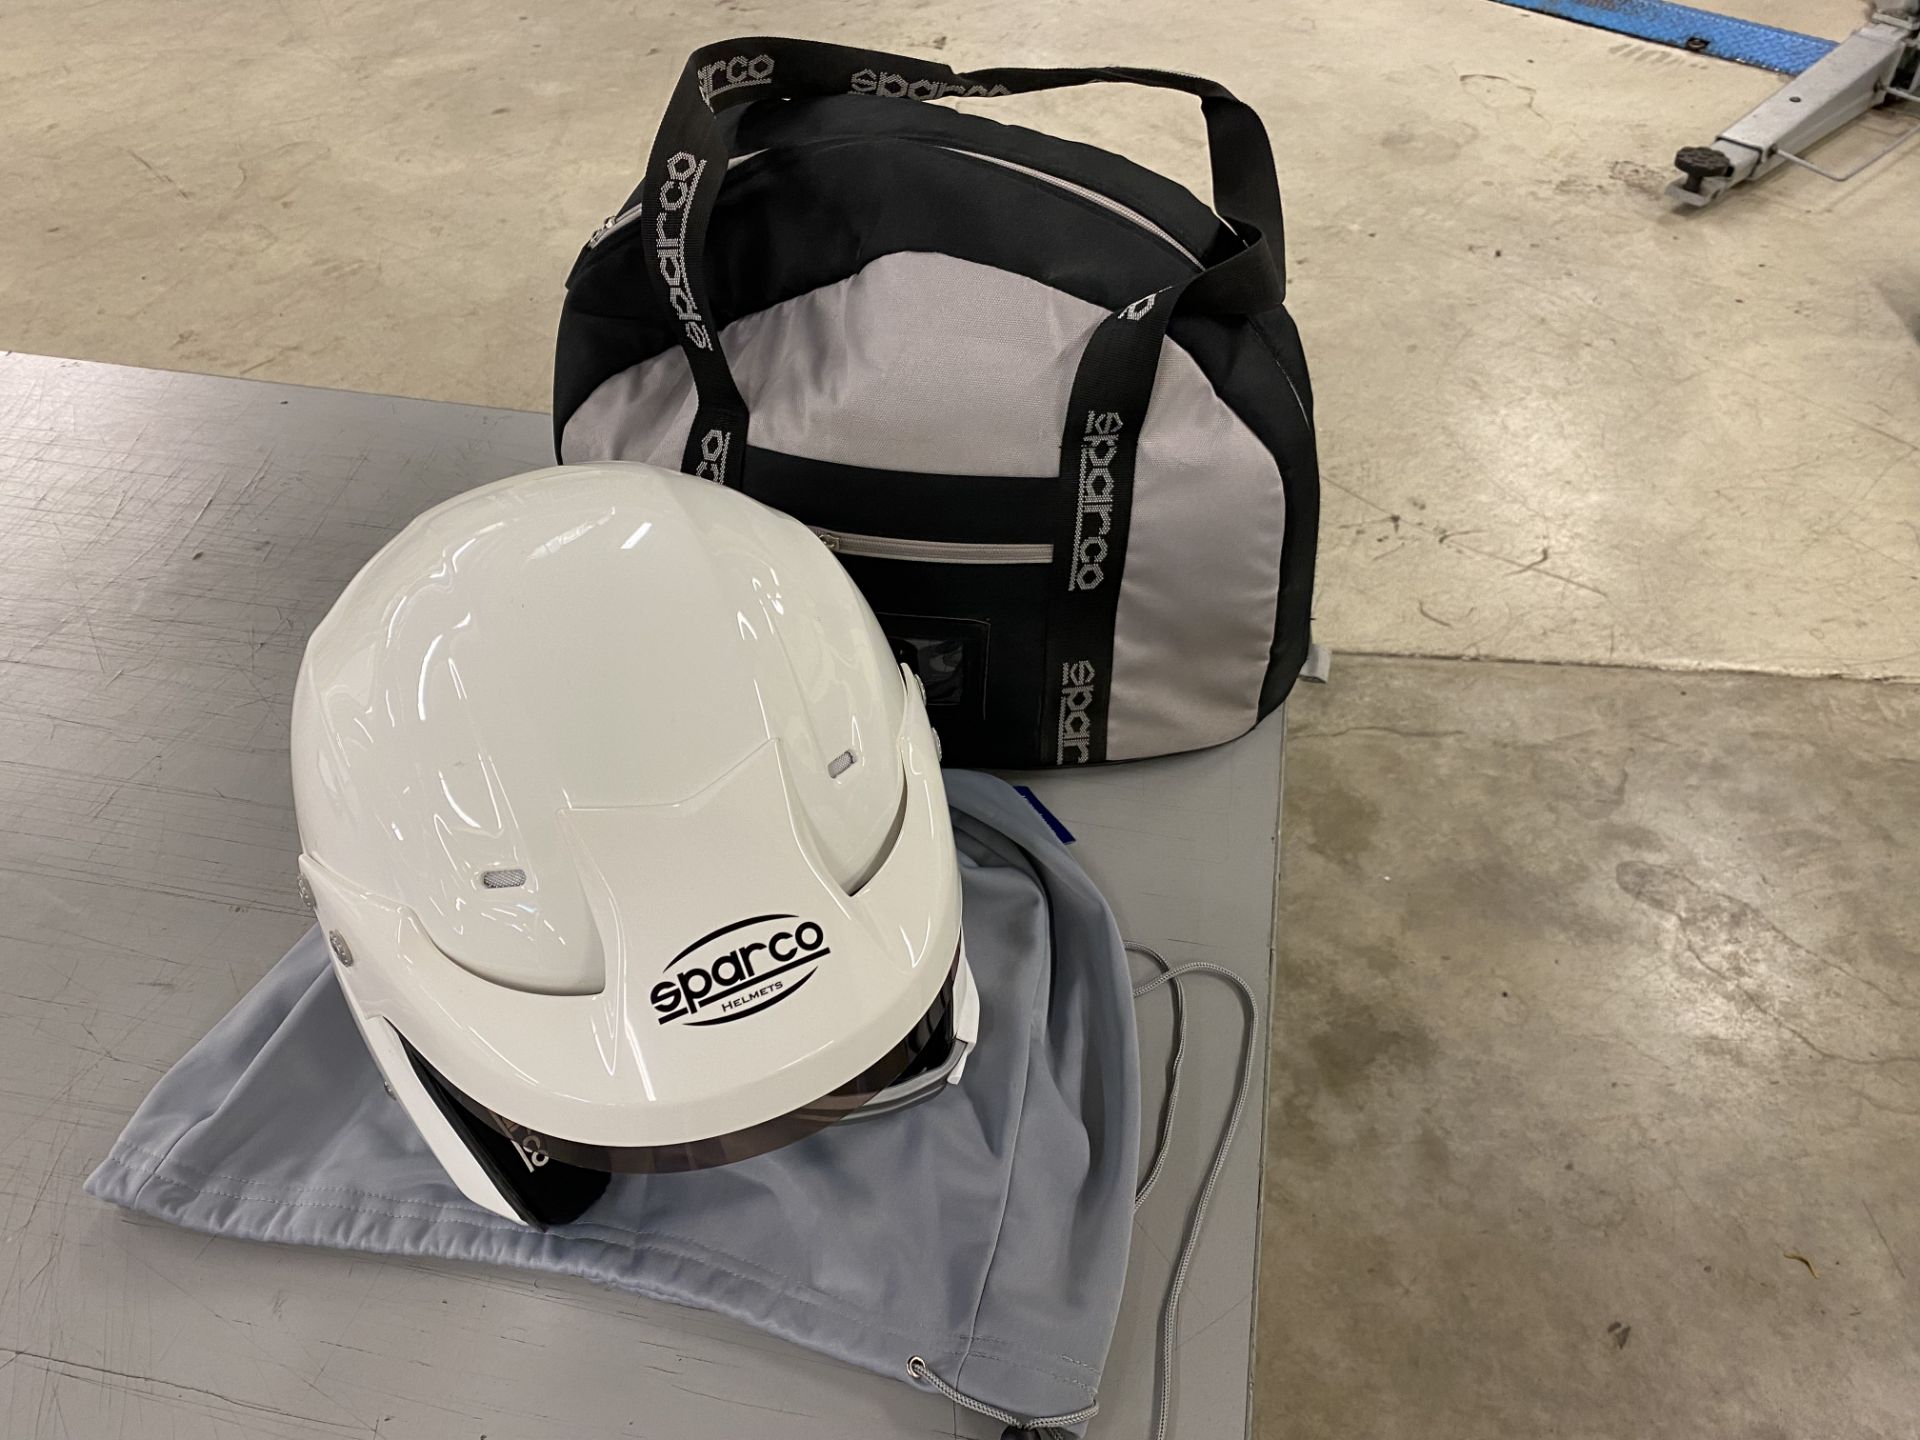 Sparco WTXJ-5i open face racing helmet with microphone and connector with cover and storage bag size